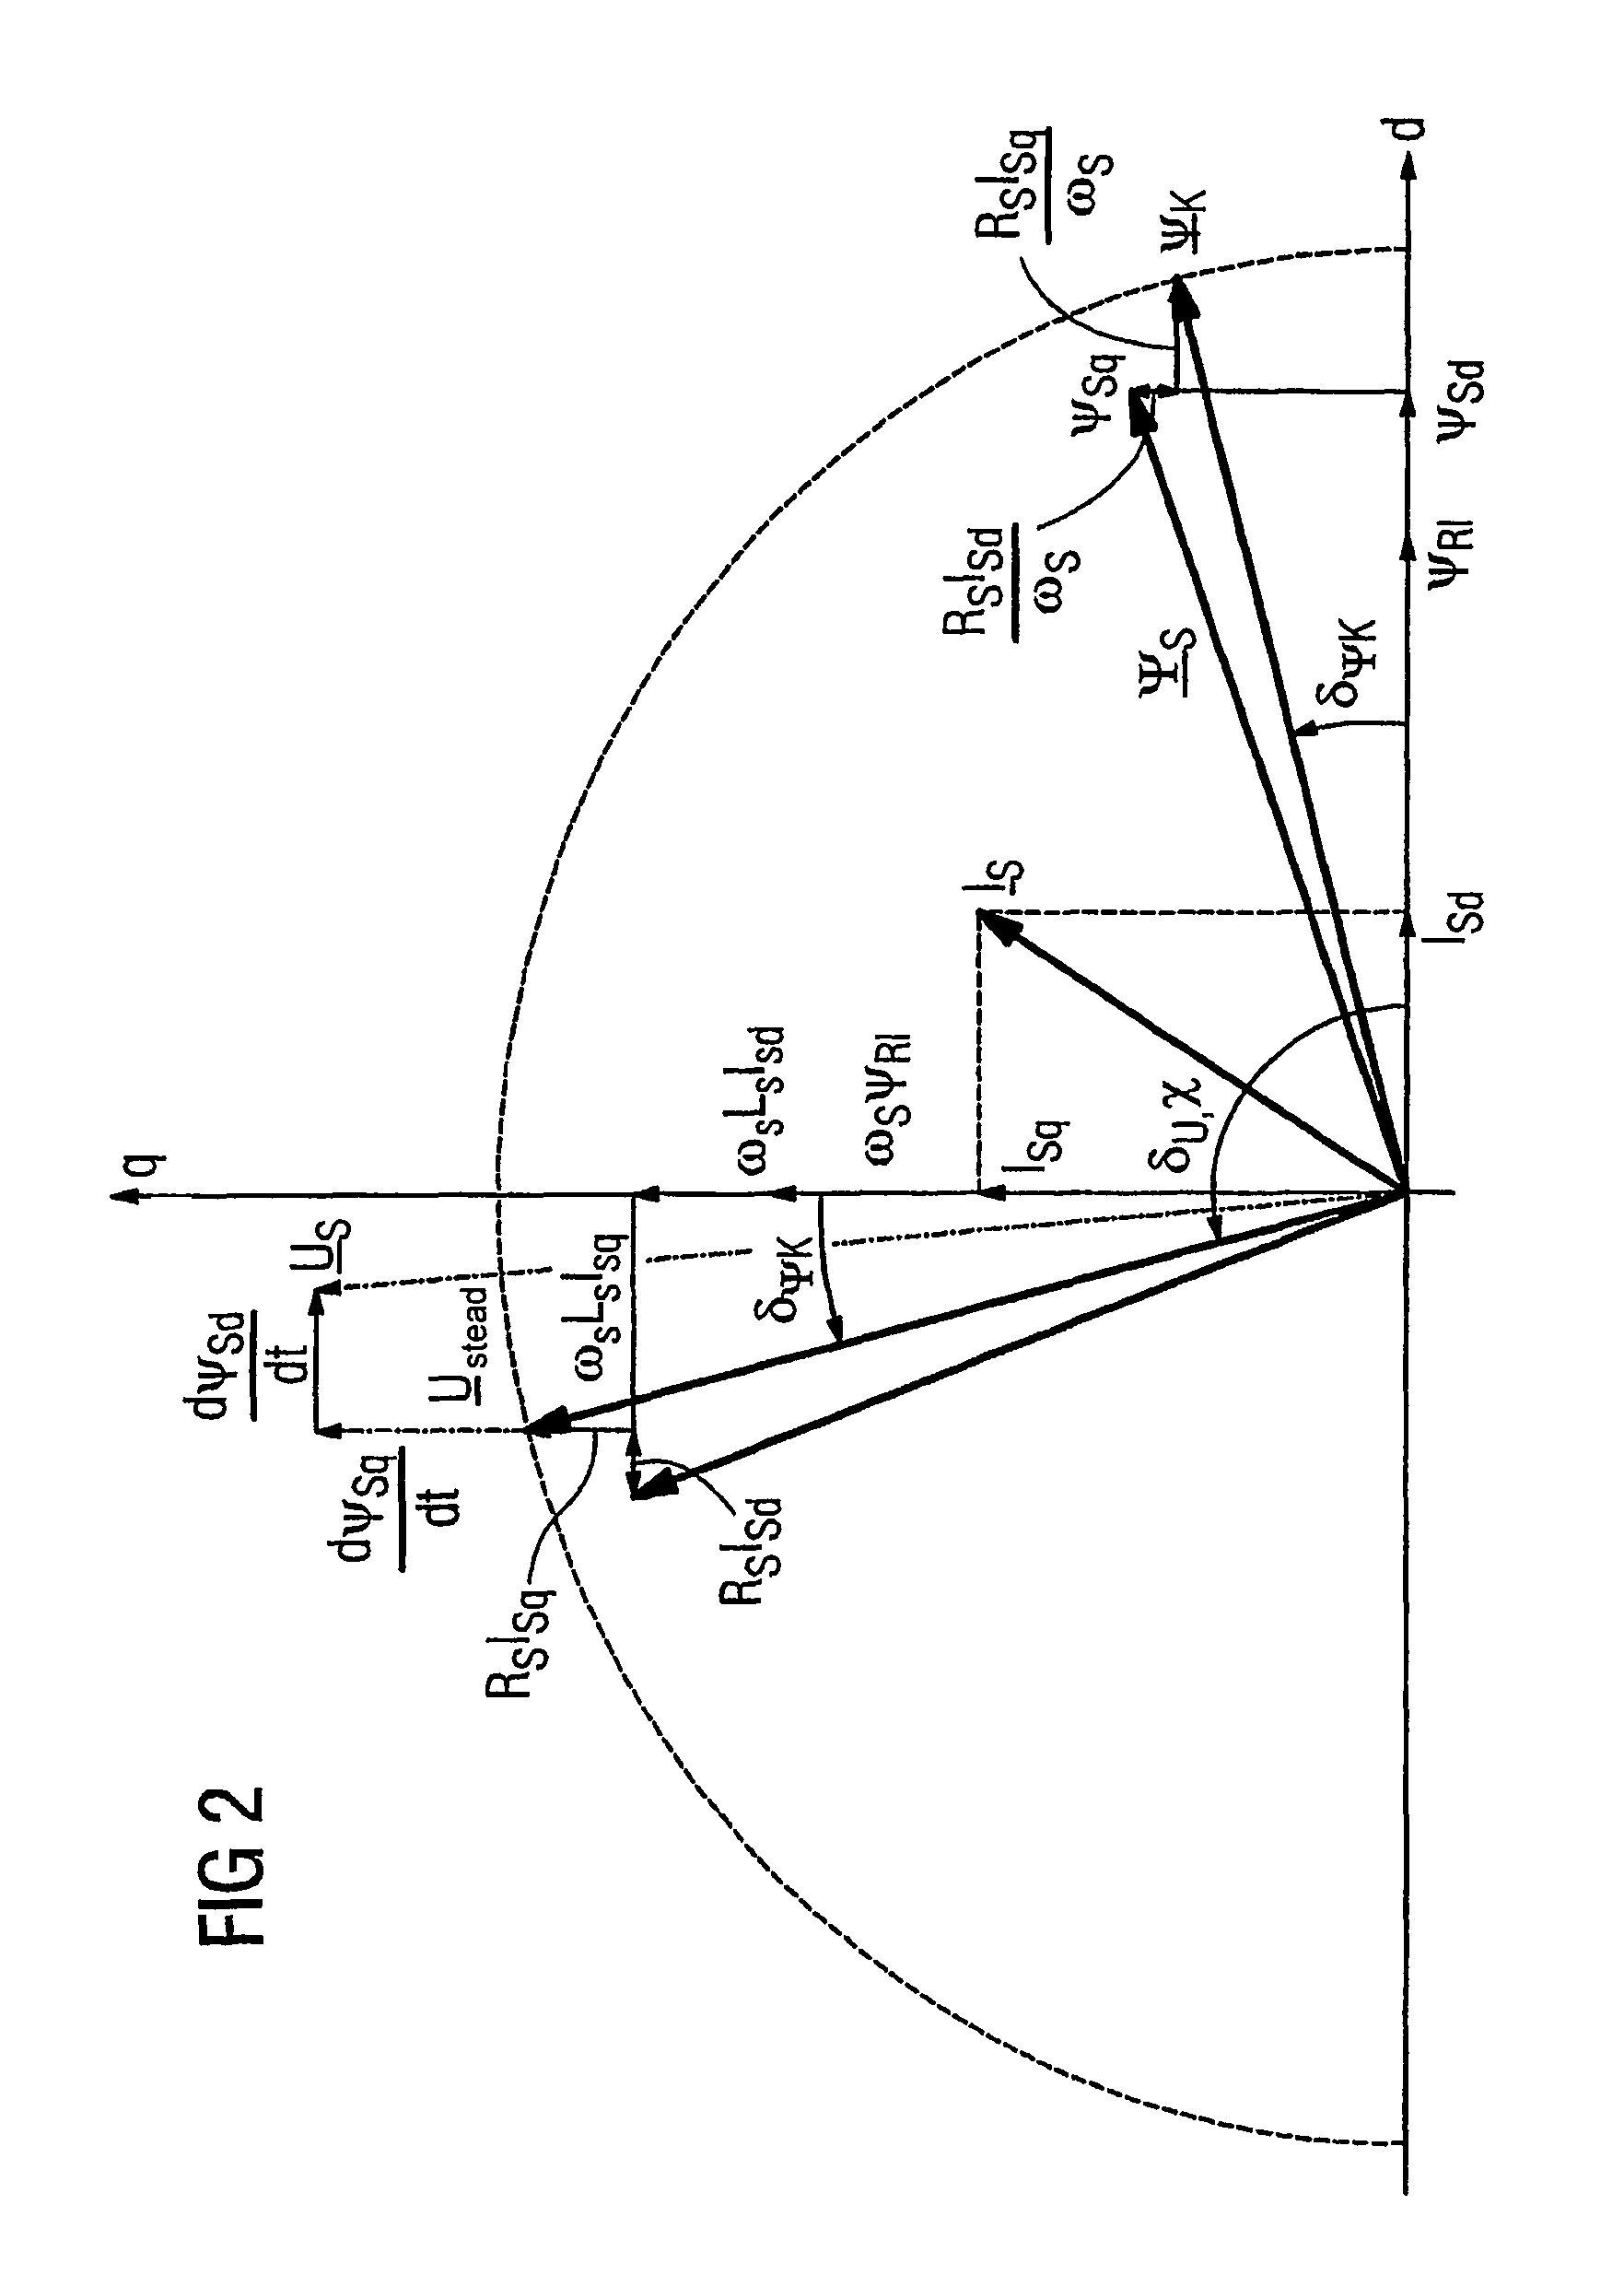 Method for controlled application of a stator current set point value and of a torque set point value for a converter-fed rotating-field machine